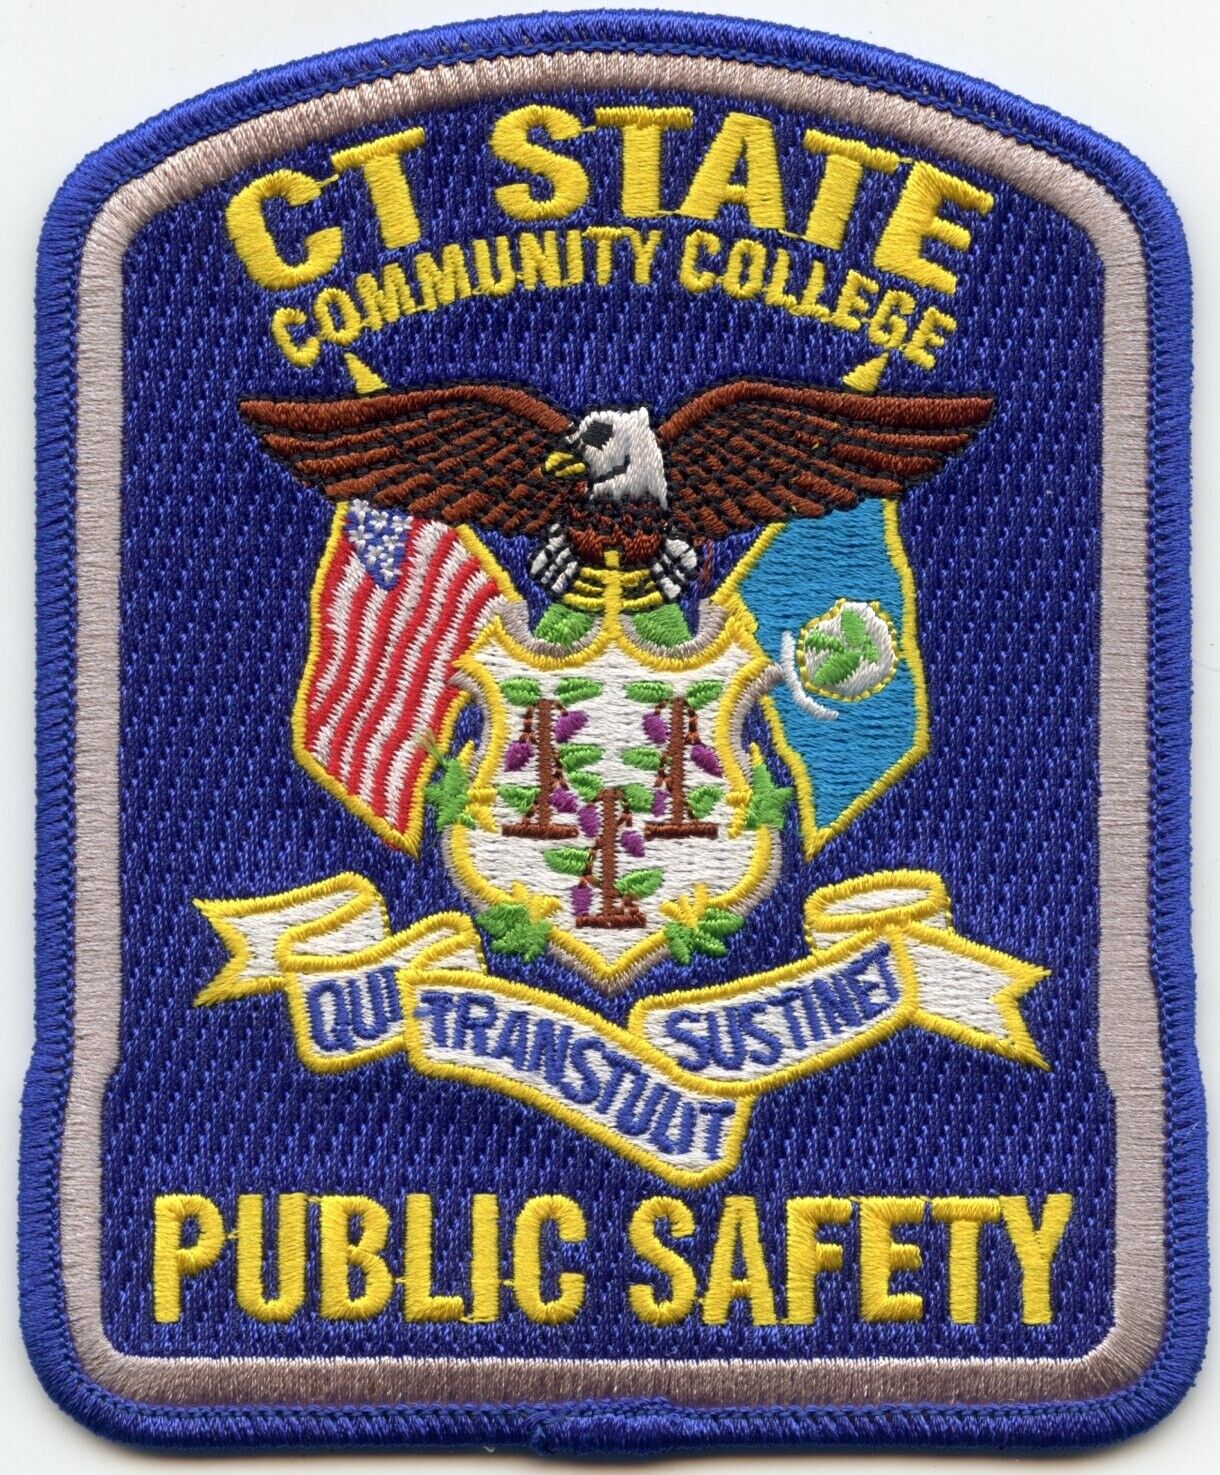 CONNECTICUT STATE COMMUNITY COLLEGE PUBLIC SAFETY CAMPUS POLICE PATCH